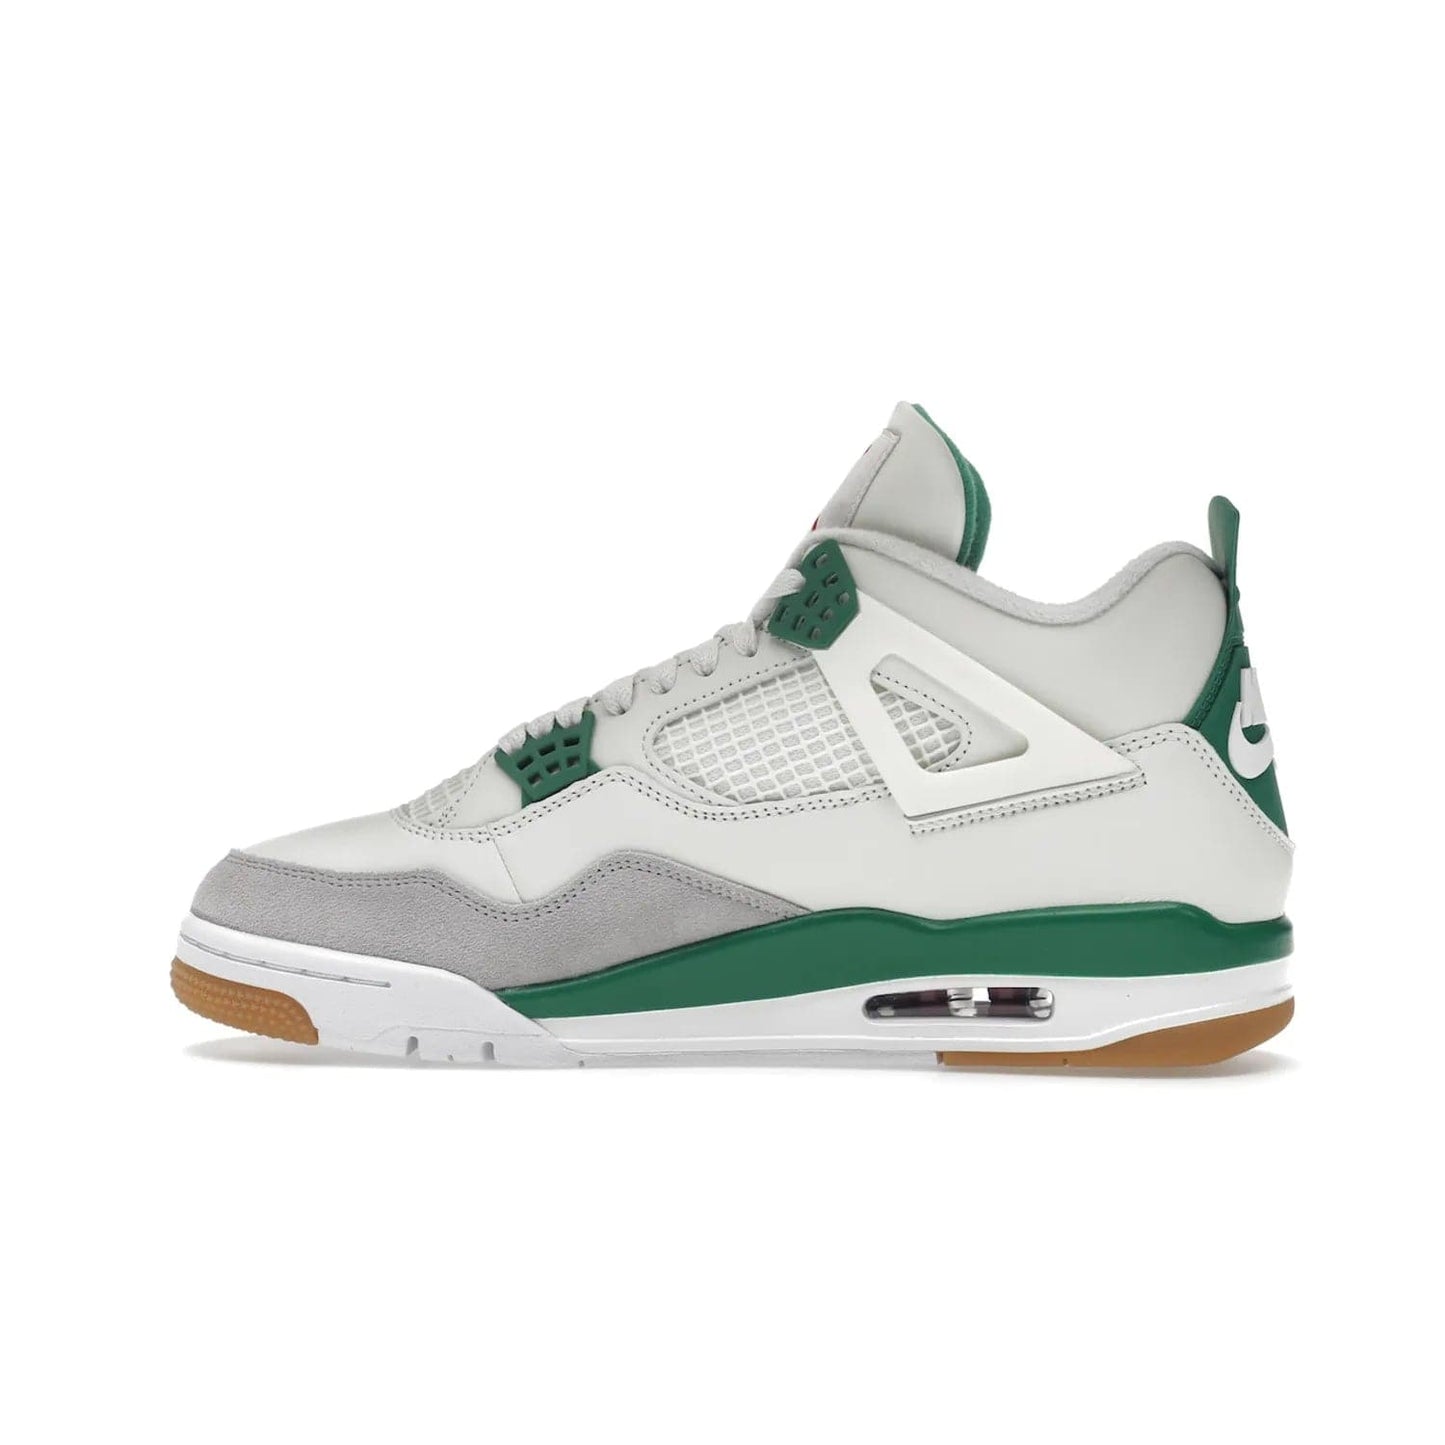 Jordan 4 Retro SB Pine Green - Image 20 - Only at www.BallersClubKickz.com - A white leather upper combined with a Neutral Grey suede mudguard gives this limited Air Jordan 4 Retro SB Pine Green sneaker its unmistakable style. Released March 20, 2023, the Jordan 4 Retro SB features a white and Pine Green midsole plus a red air unit with a gum outsole for grip. The perfect blend of Nike SB skateboarding and Jordan 4 classic design.